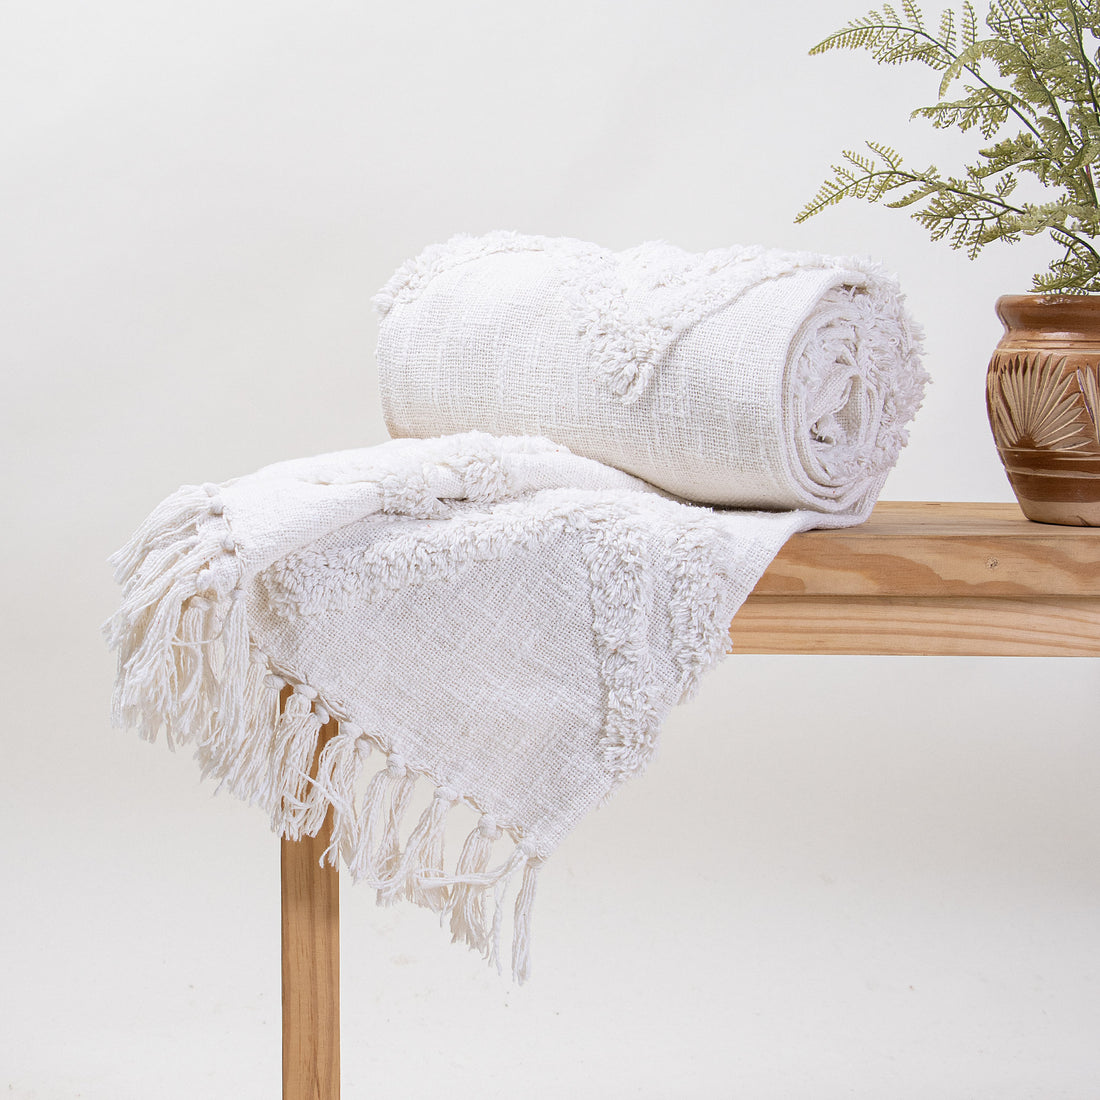 White Tufted Throw Blankets For Couch Decor